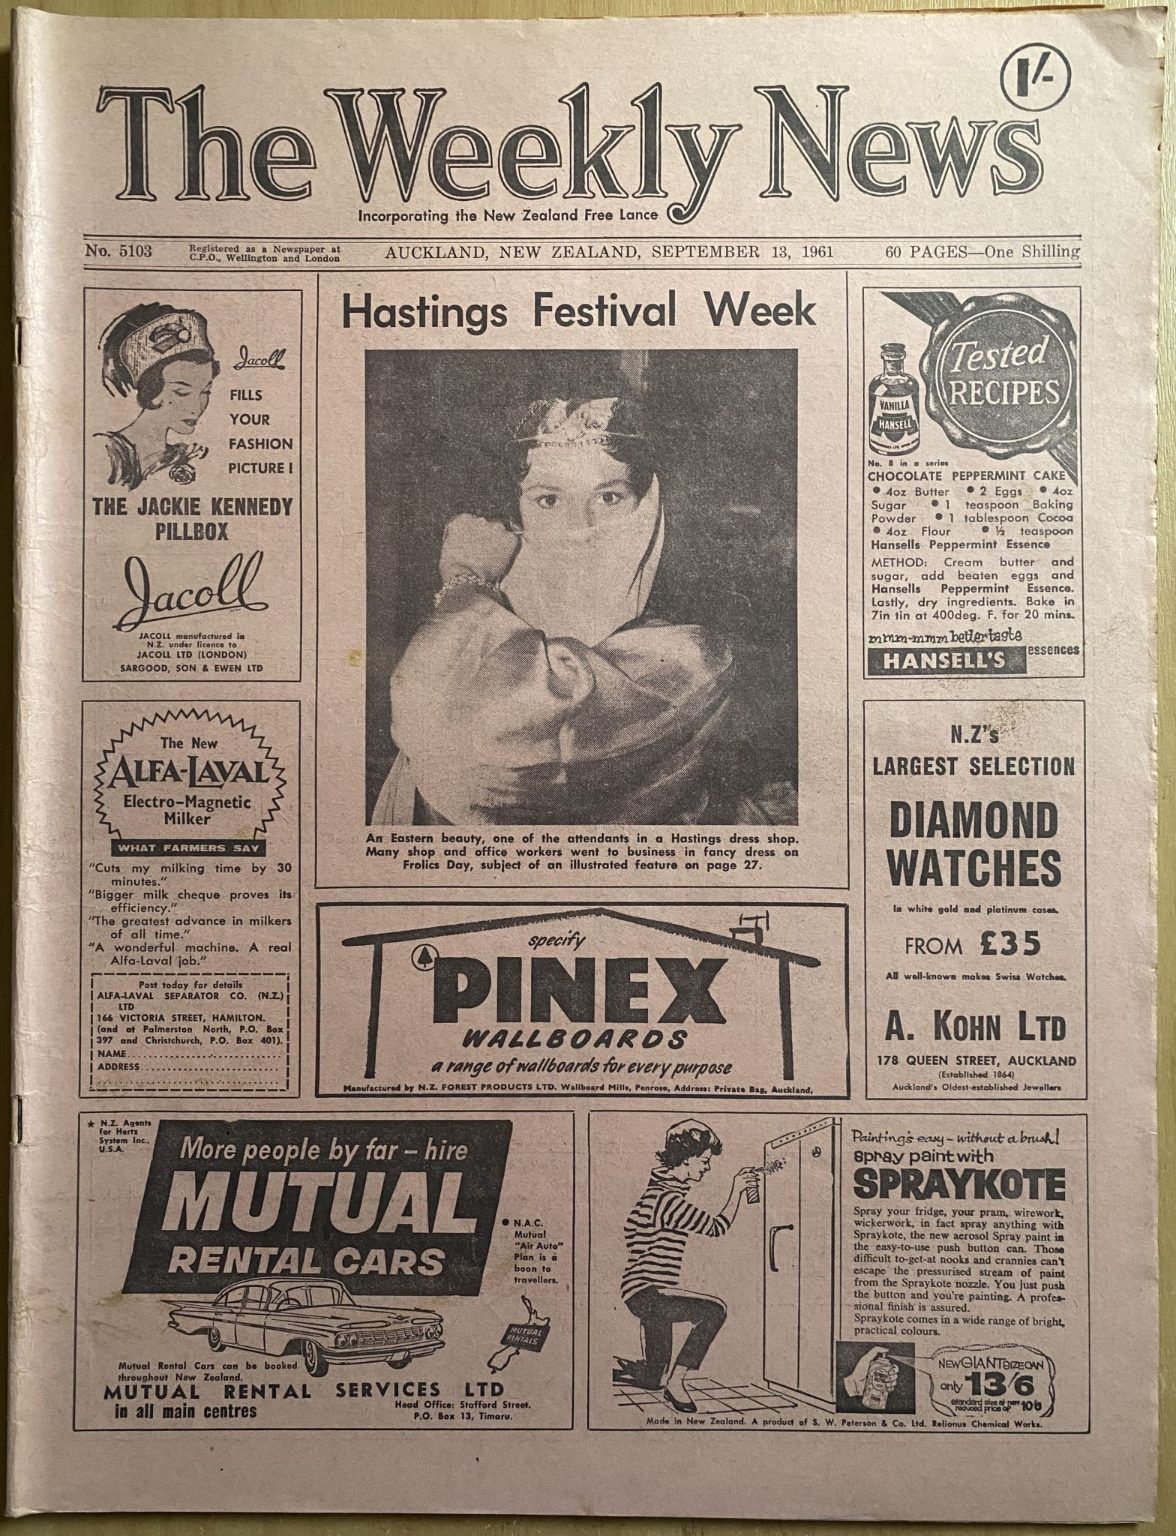 OLD NEWSPAPER: The Weekly News, No. 5103, 13 September 1961